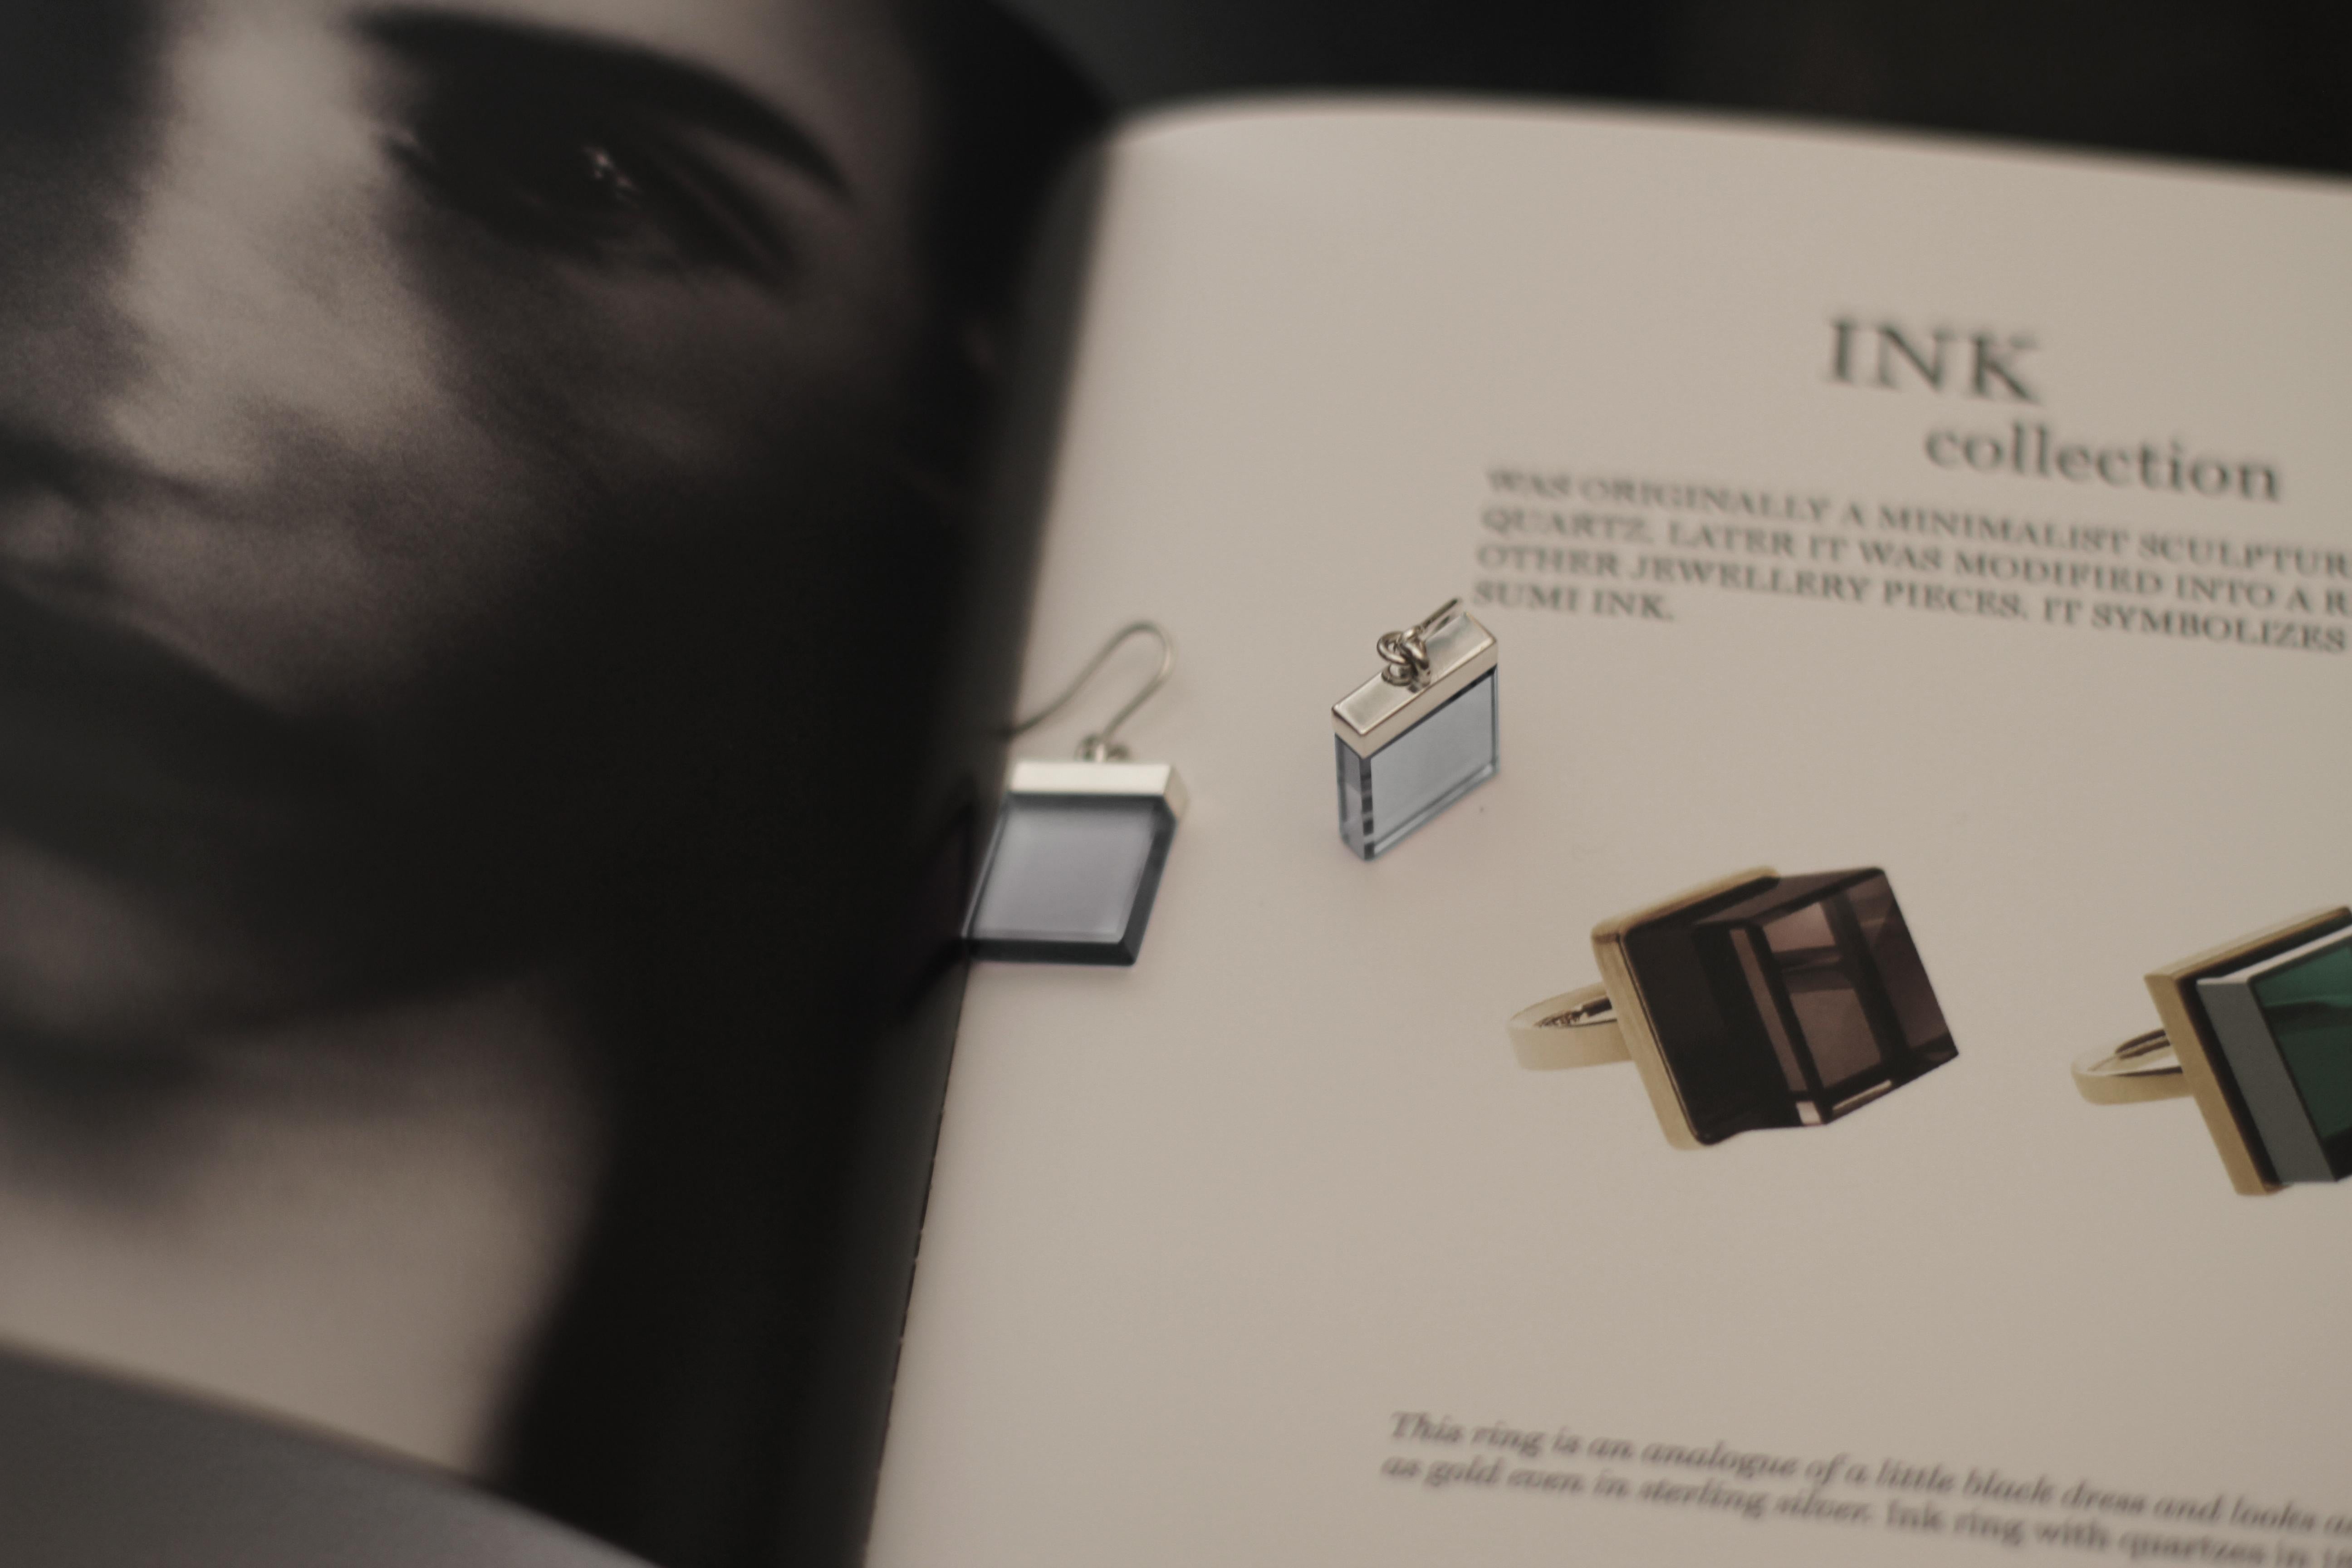 This jewellery collection, designed as sculptures by oil painter Polya Medvedeva from Berlin, was featured in Harper's Bazaar UA and Vogue UA publications.

These earrings are made of sterling silver and feature tender blue chalcedonies measuring